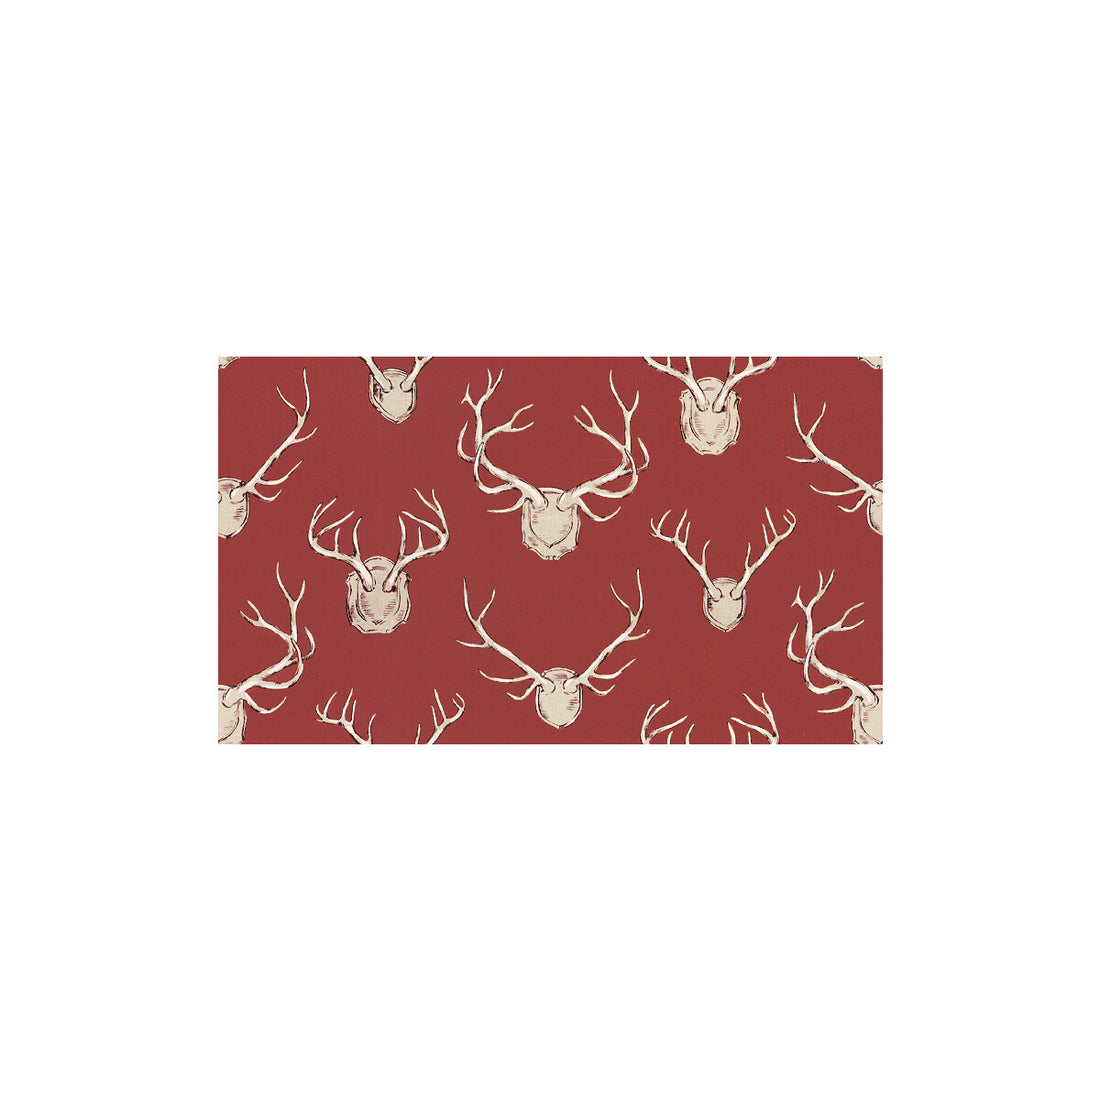 Antlers fabric in red color - pattern 2009143.19.0 - by Lee Jofa in the Eric Cohler Lodge collection